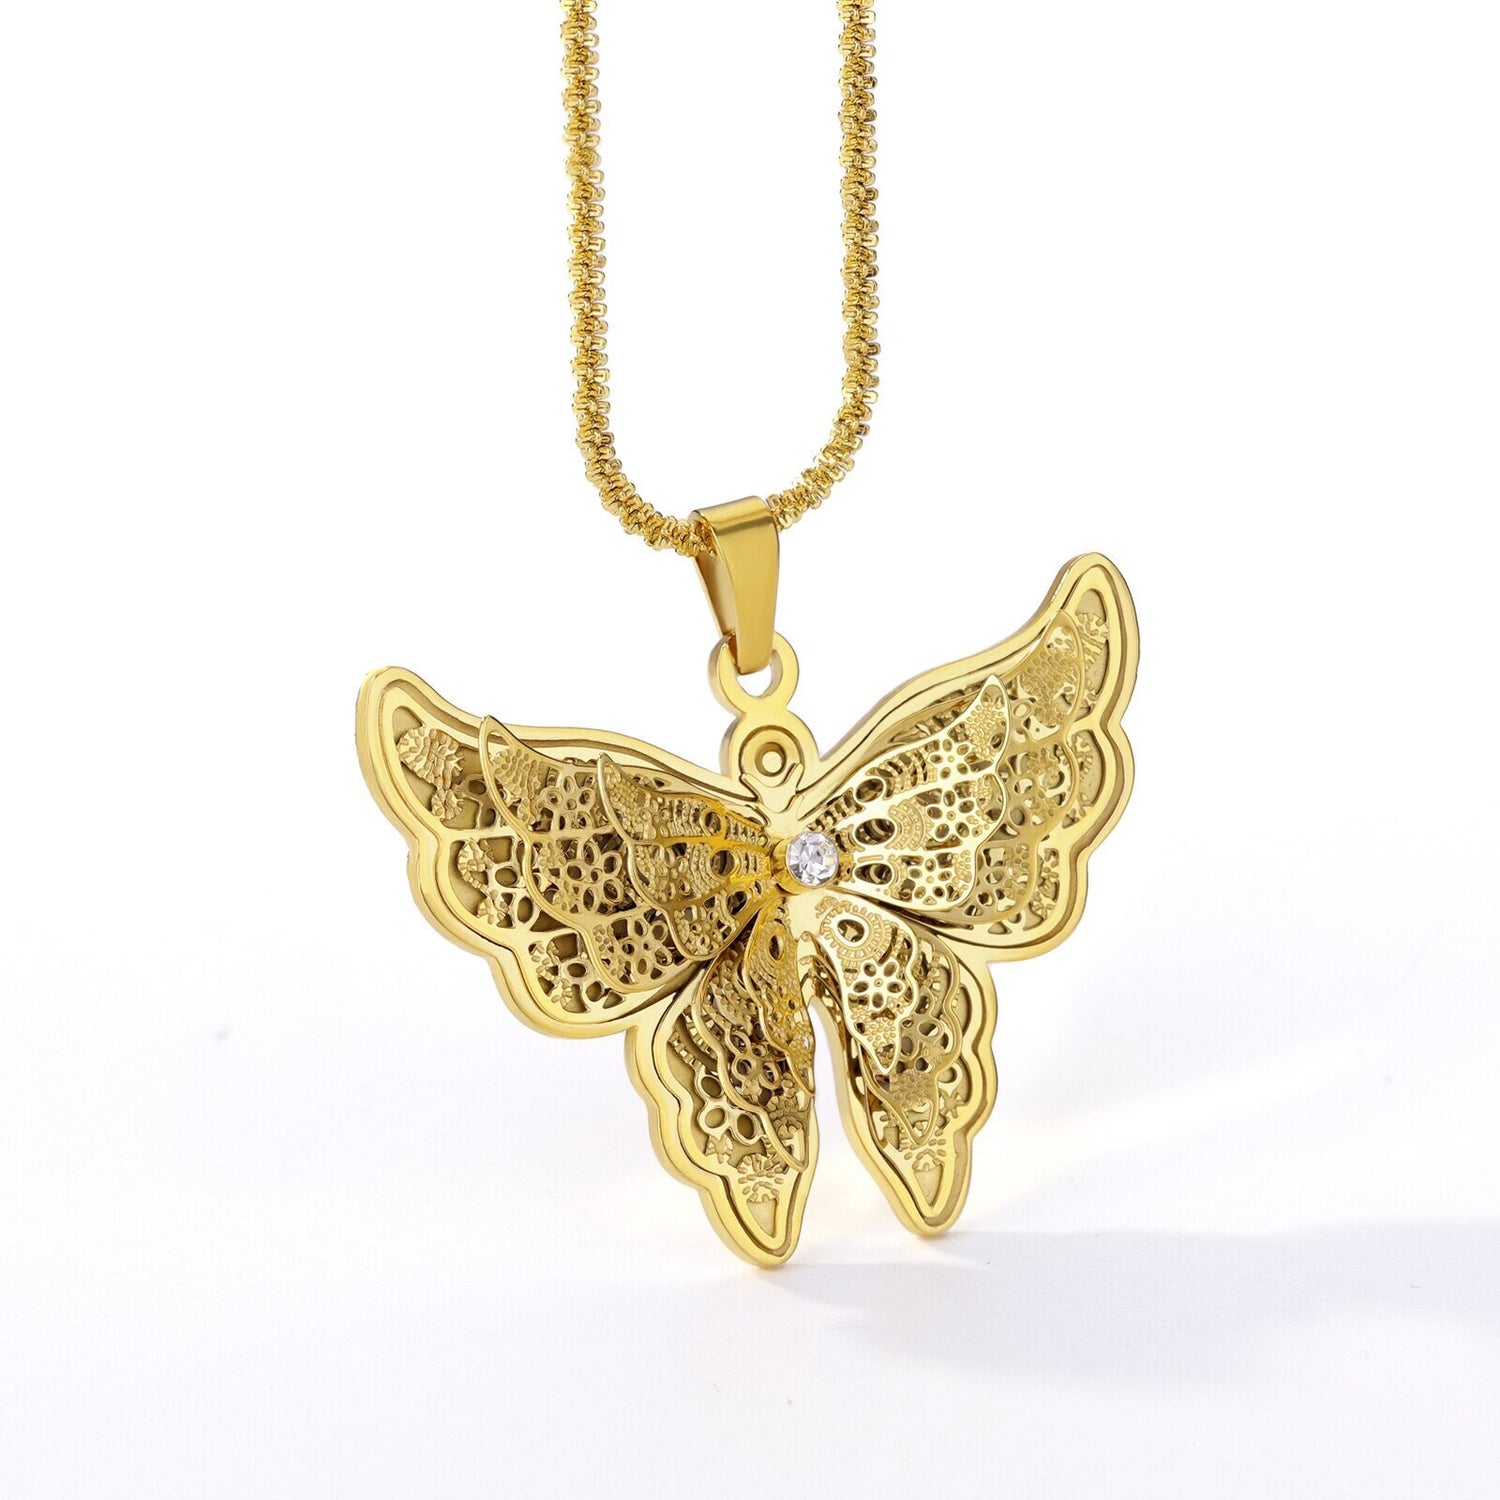 Boho Gold Butterfly Charm Pendant, Punk 18K Gold Butterfly Necklace, Elegant Dainty Minimalist Pendant for Women, Gift for Her